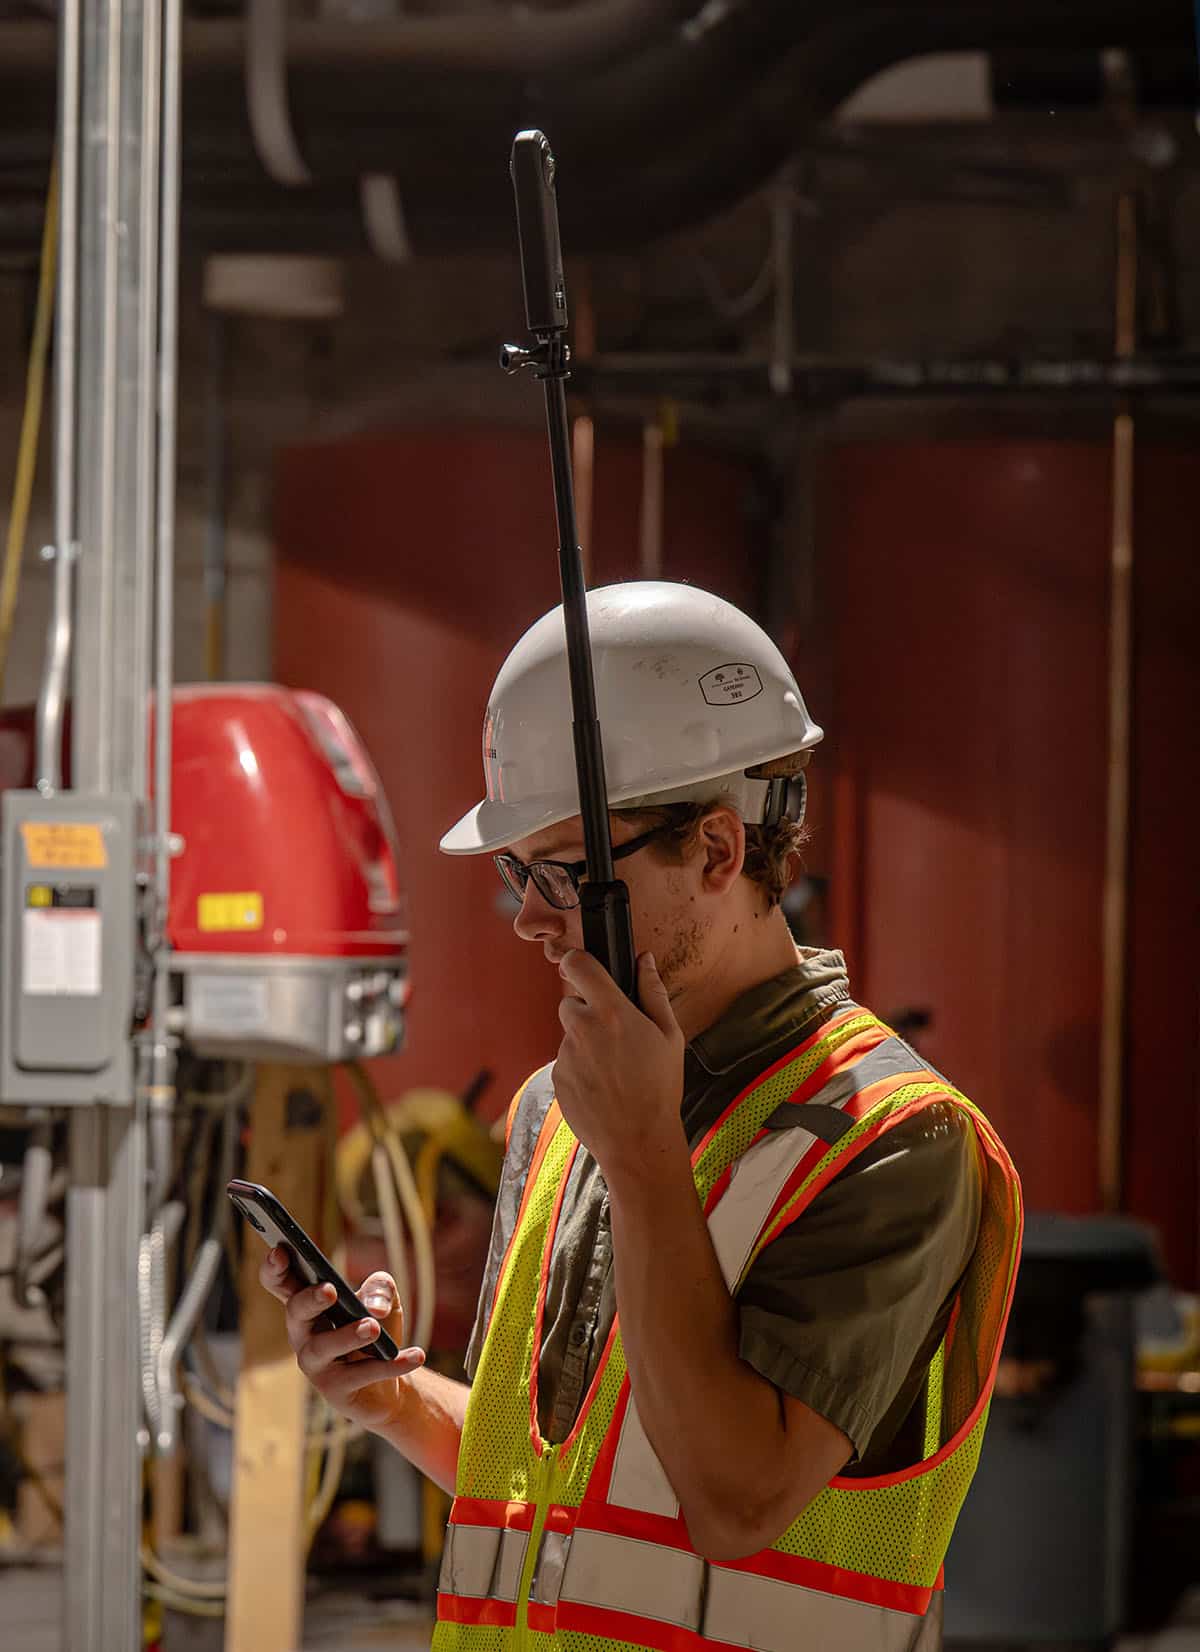 McGough engineer on a job site using handheld electronic measurement devices